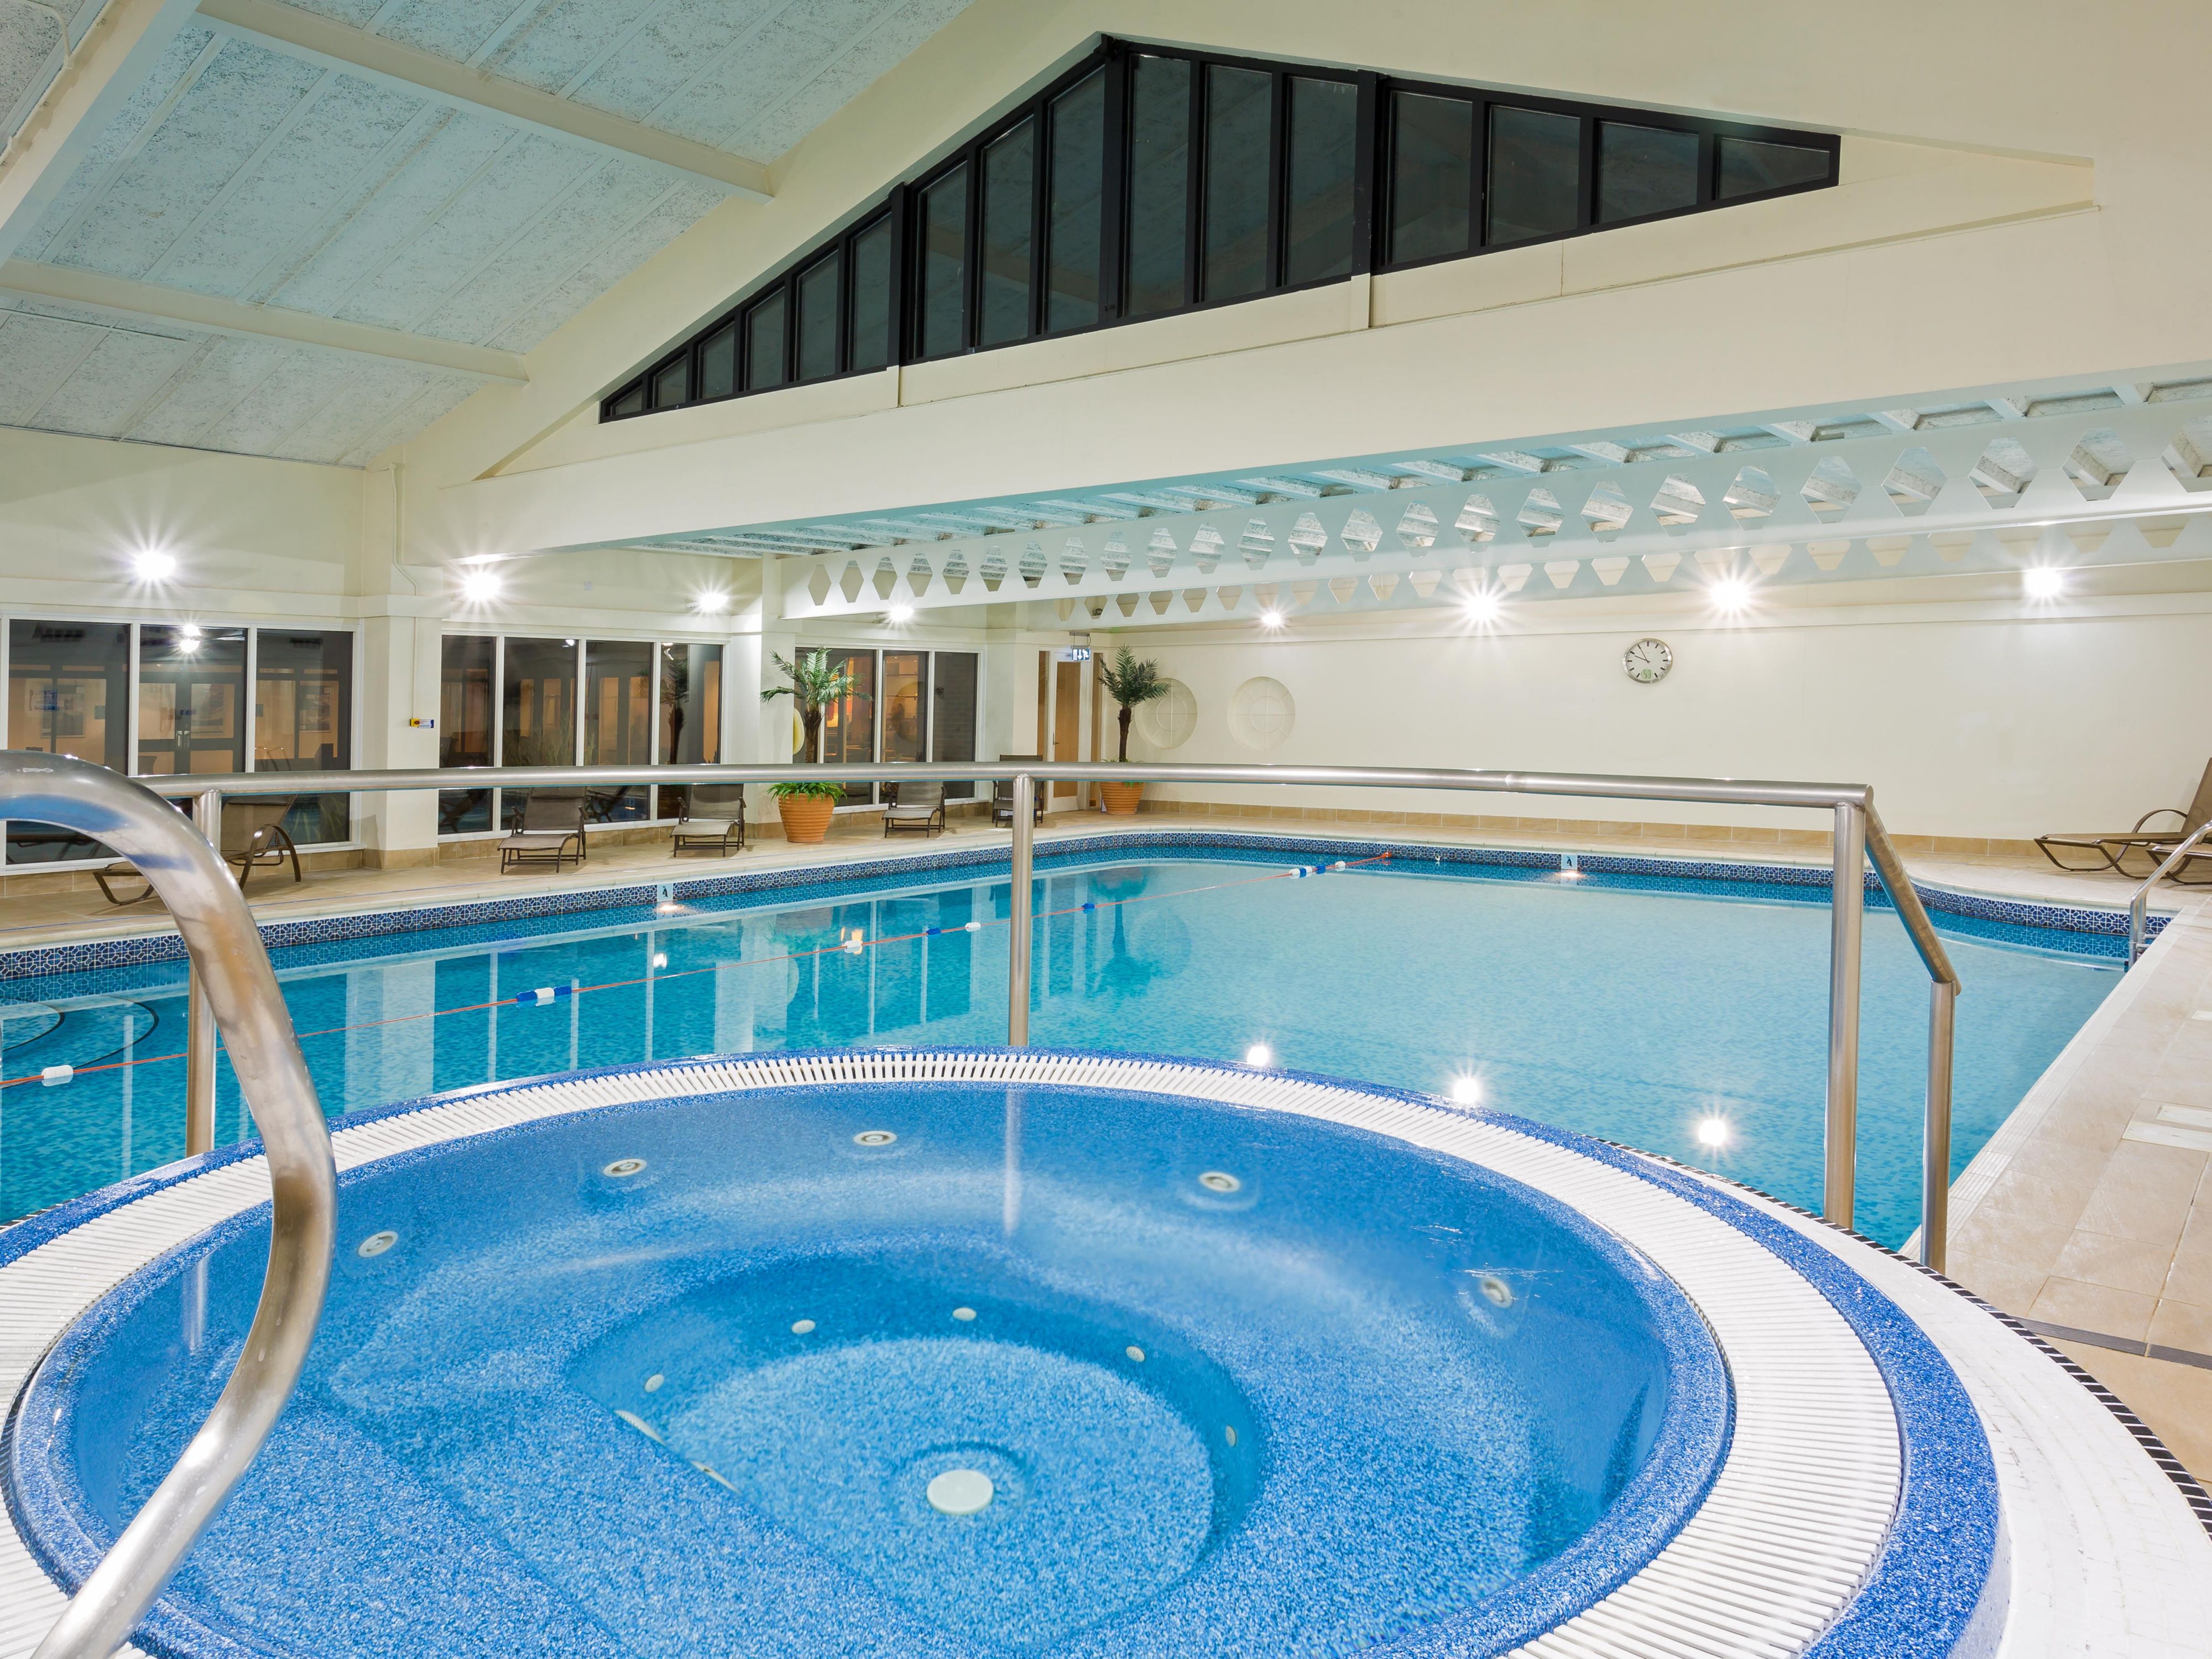 Workout in our fully equipped gymnasium, enjoy a refreshing swim in our heated indoor pool or simply relax in the sauna, steam room or Jacuzzi. The Health Club is complimentary for all hotel guests. 